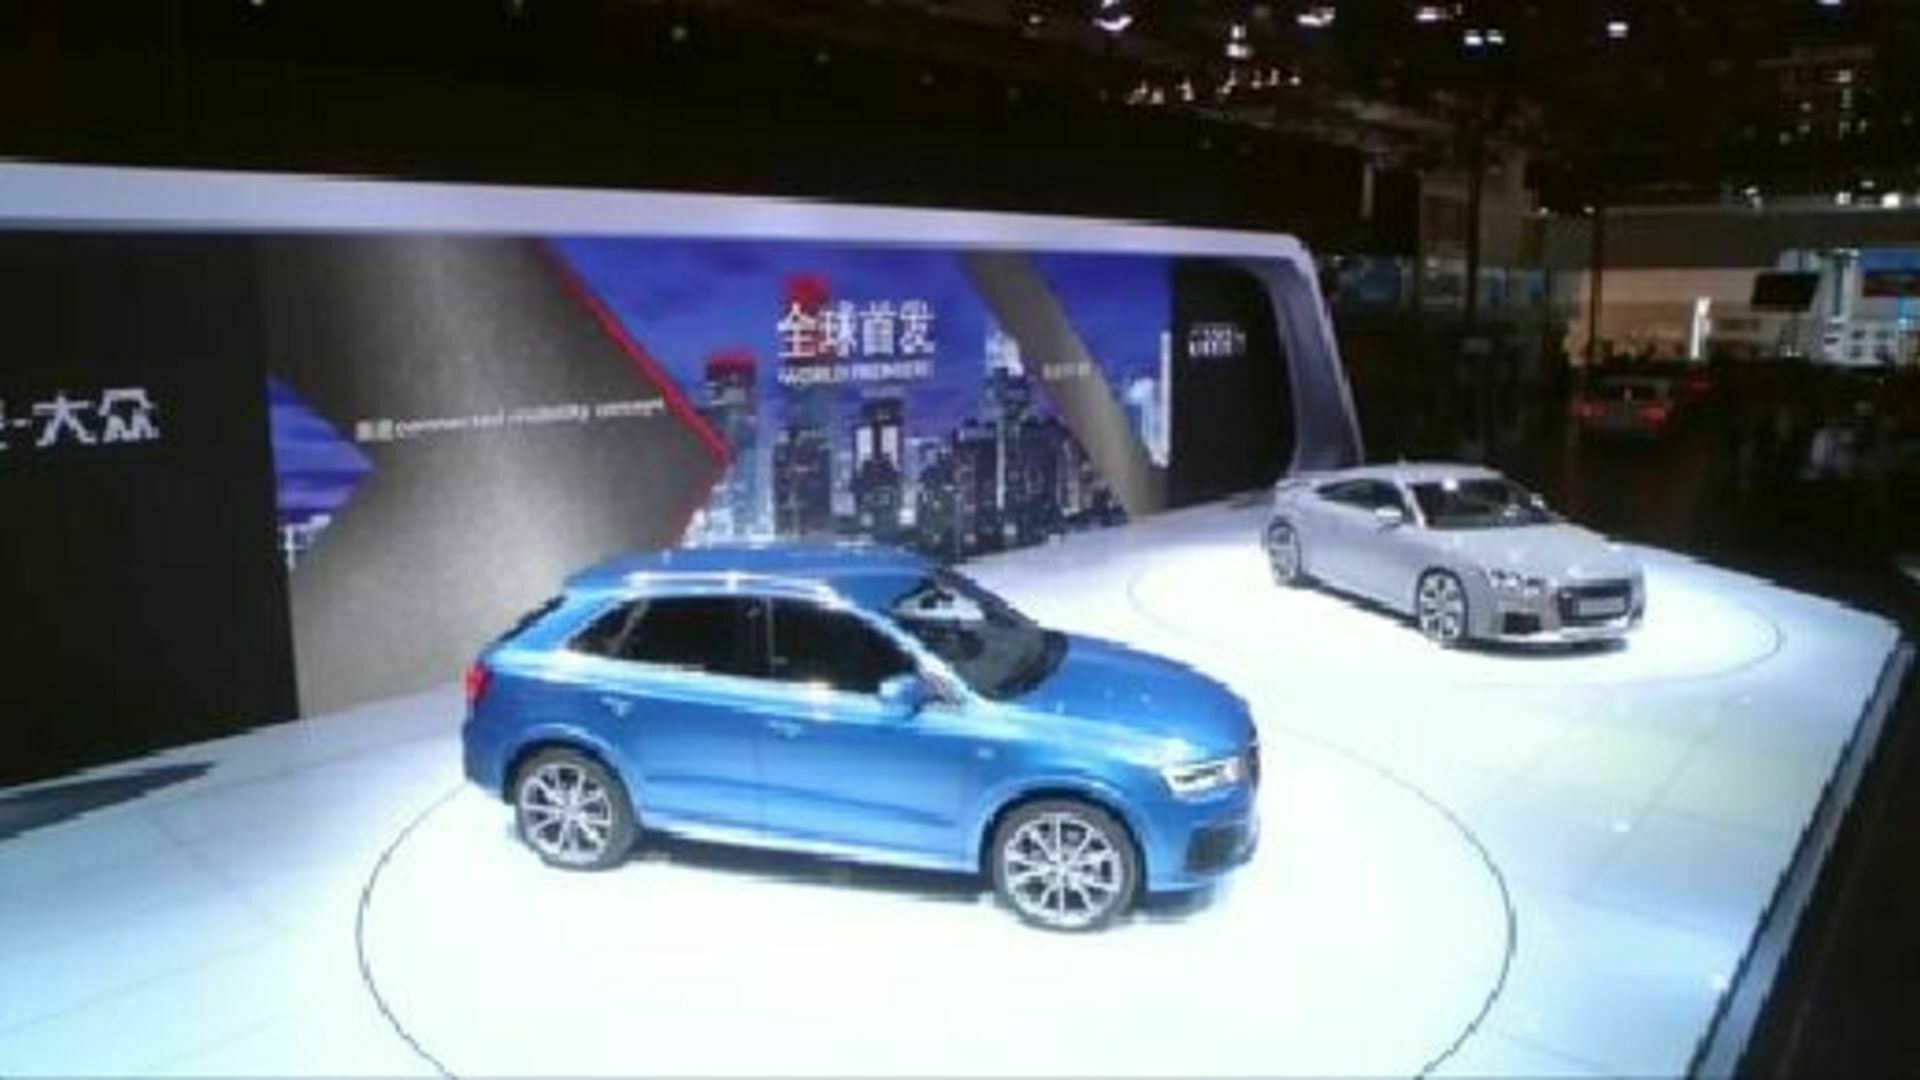 Auto China 2016 in Beijing - The Audi press conference